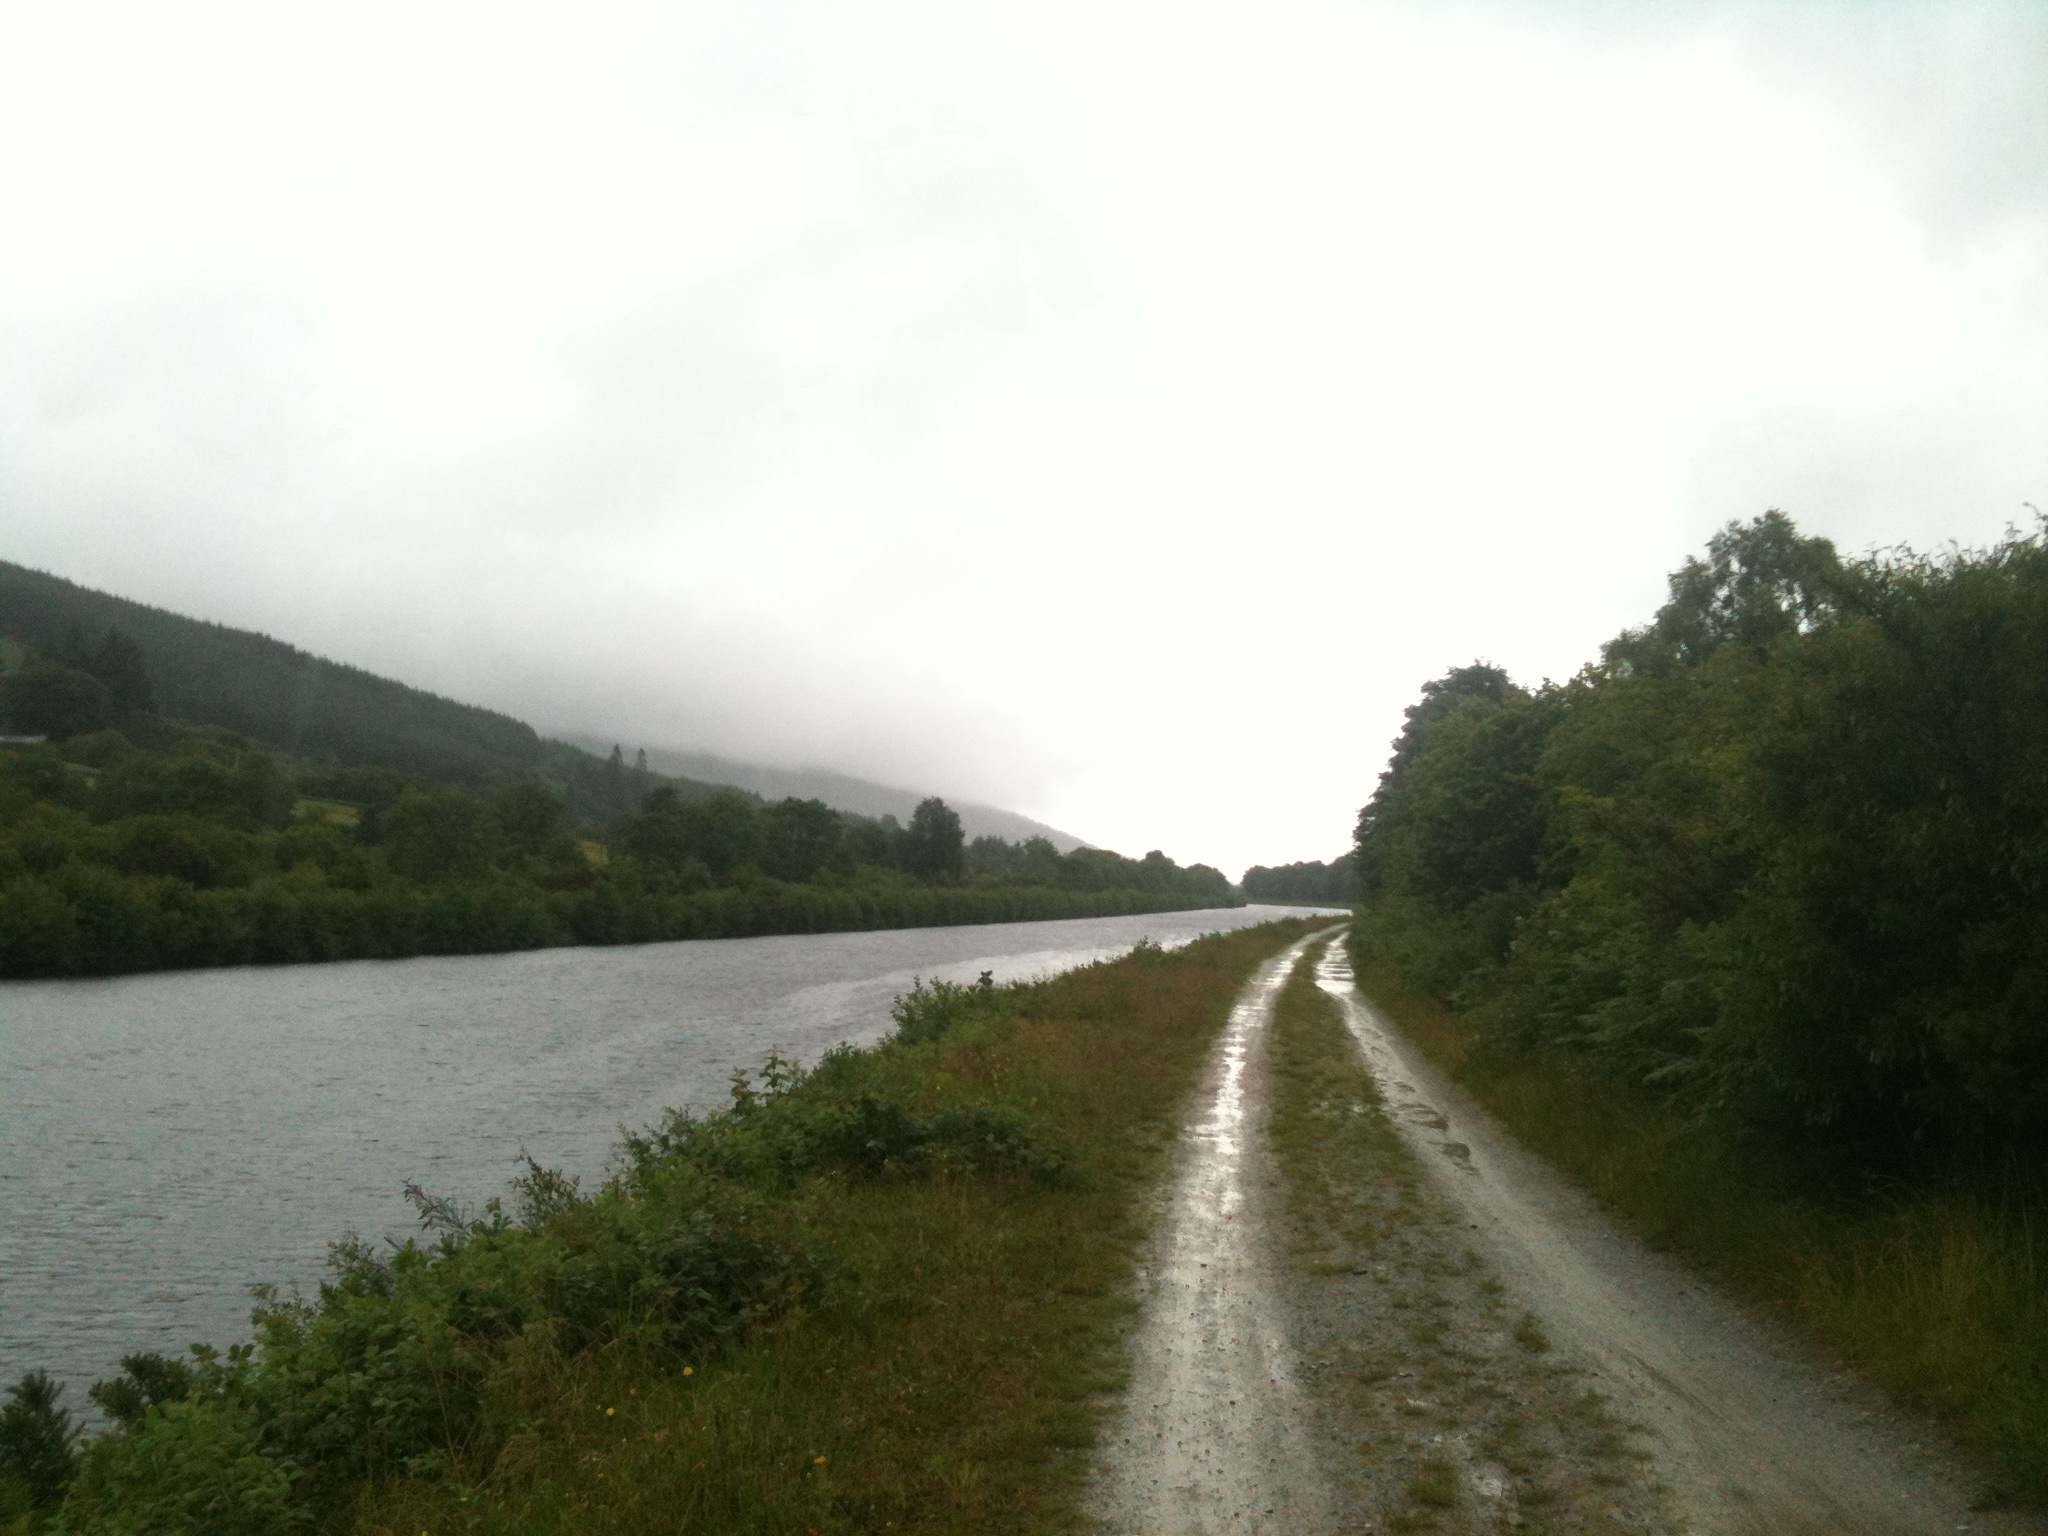 Along the Caledonian canal